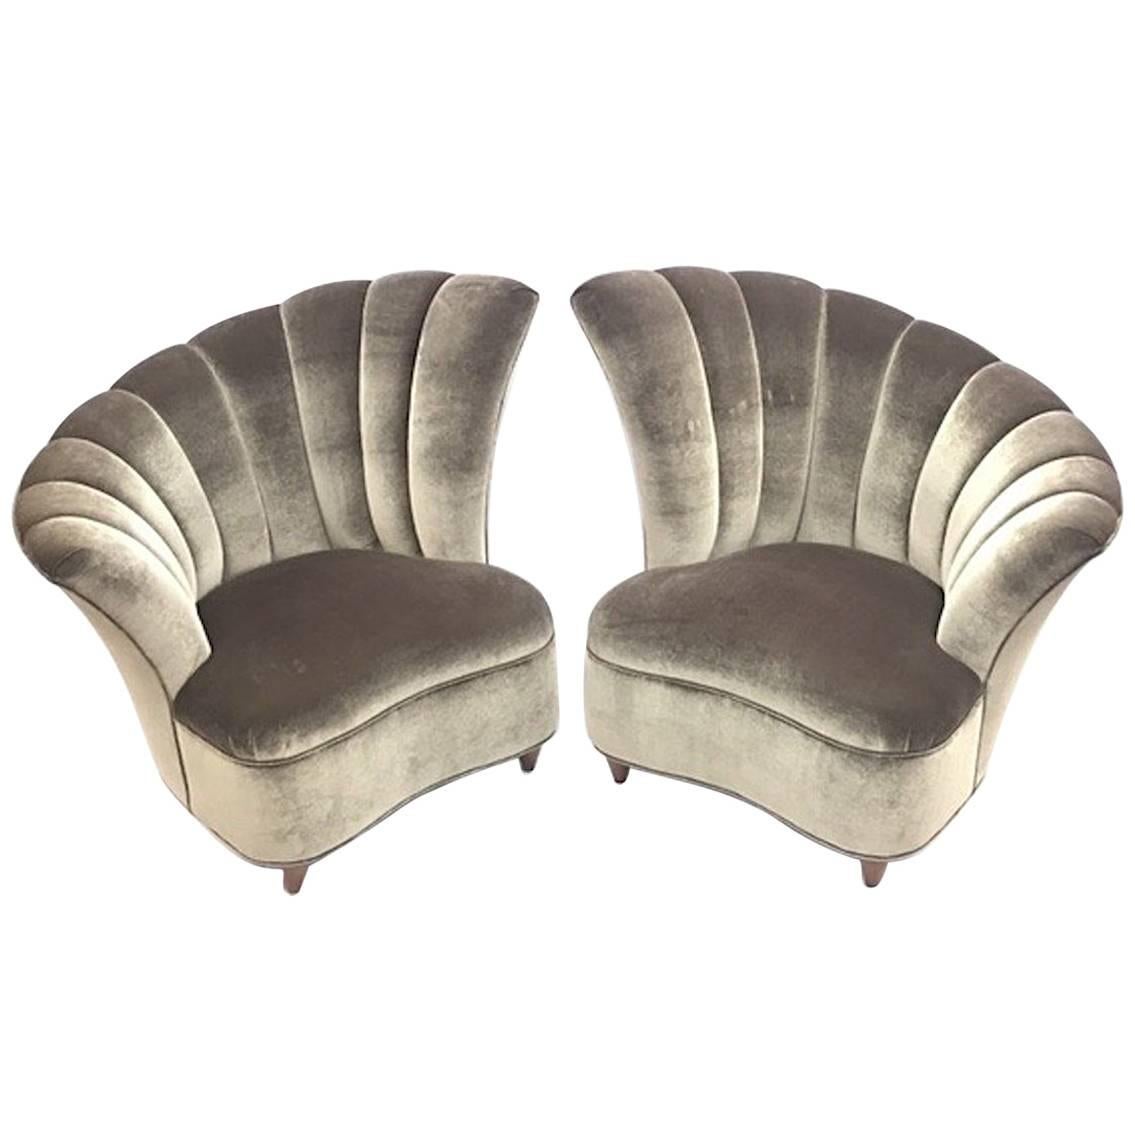 Hollywood Fan Back Chairs Mid-Century Modern For Sale